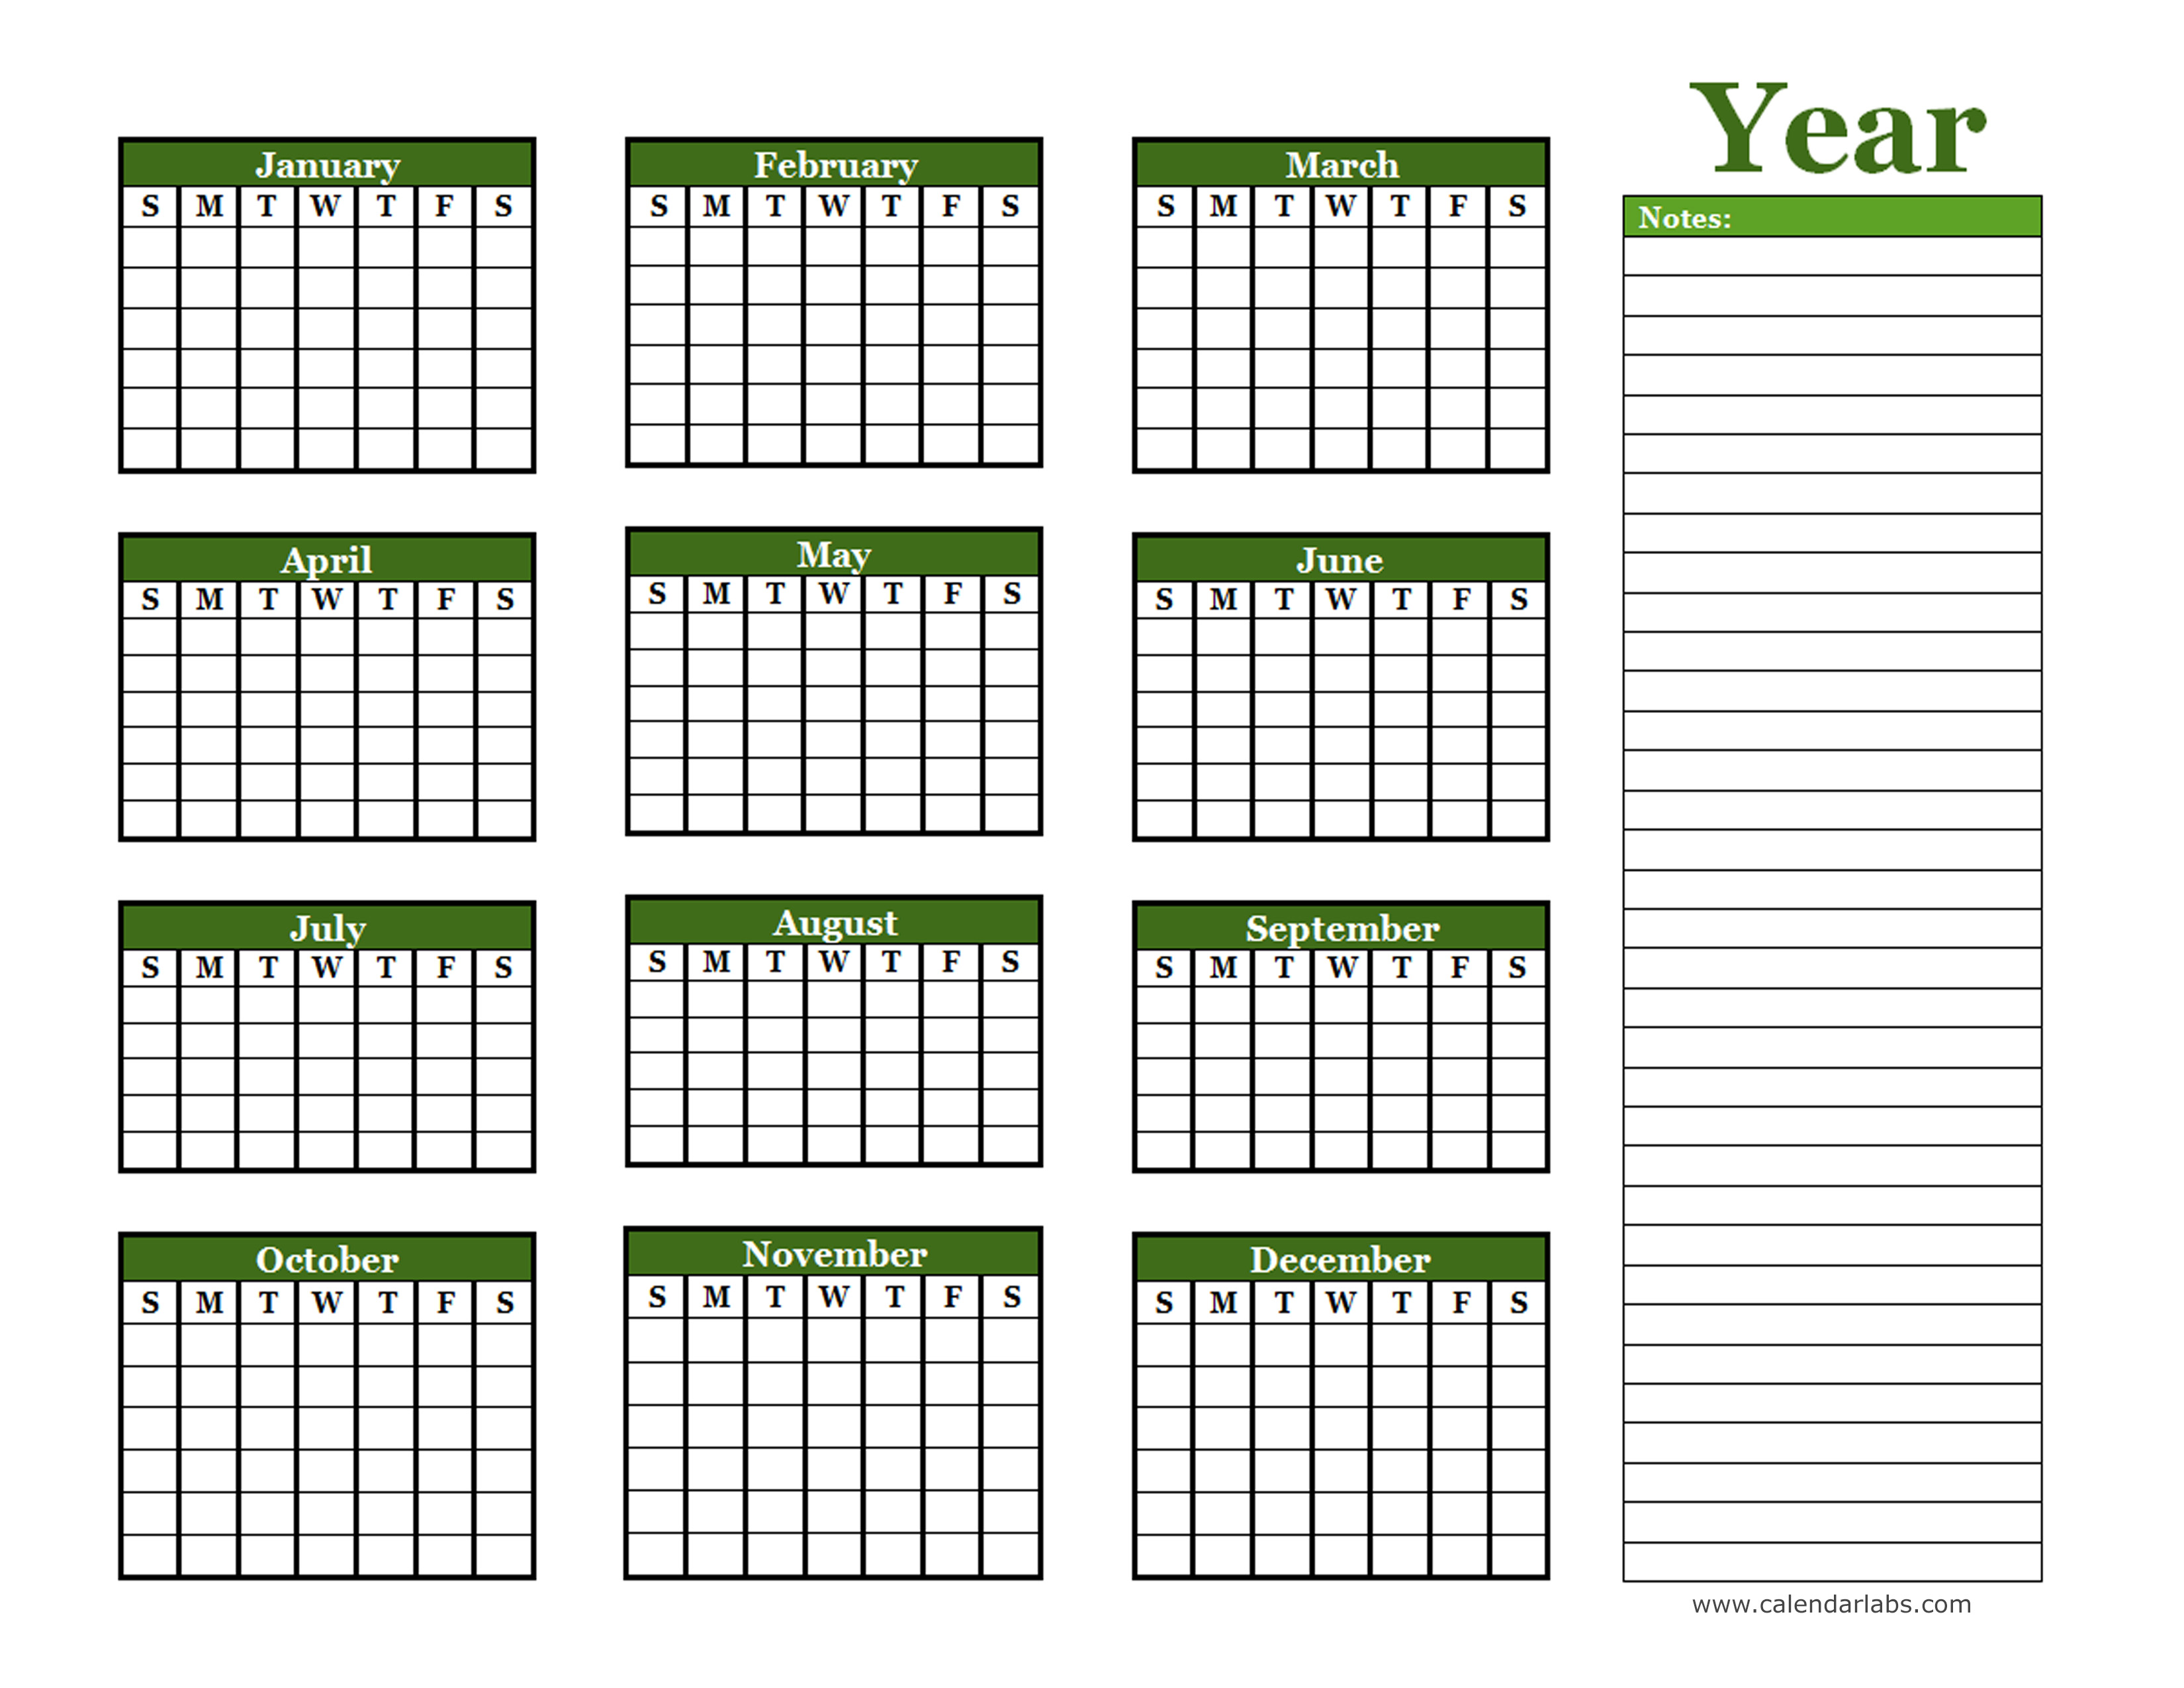 Yearly Blank Calendar with Holidays - Free Printable Templates